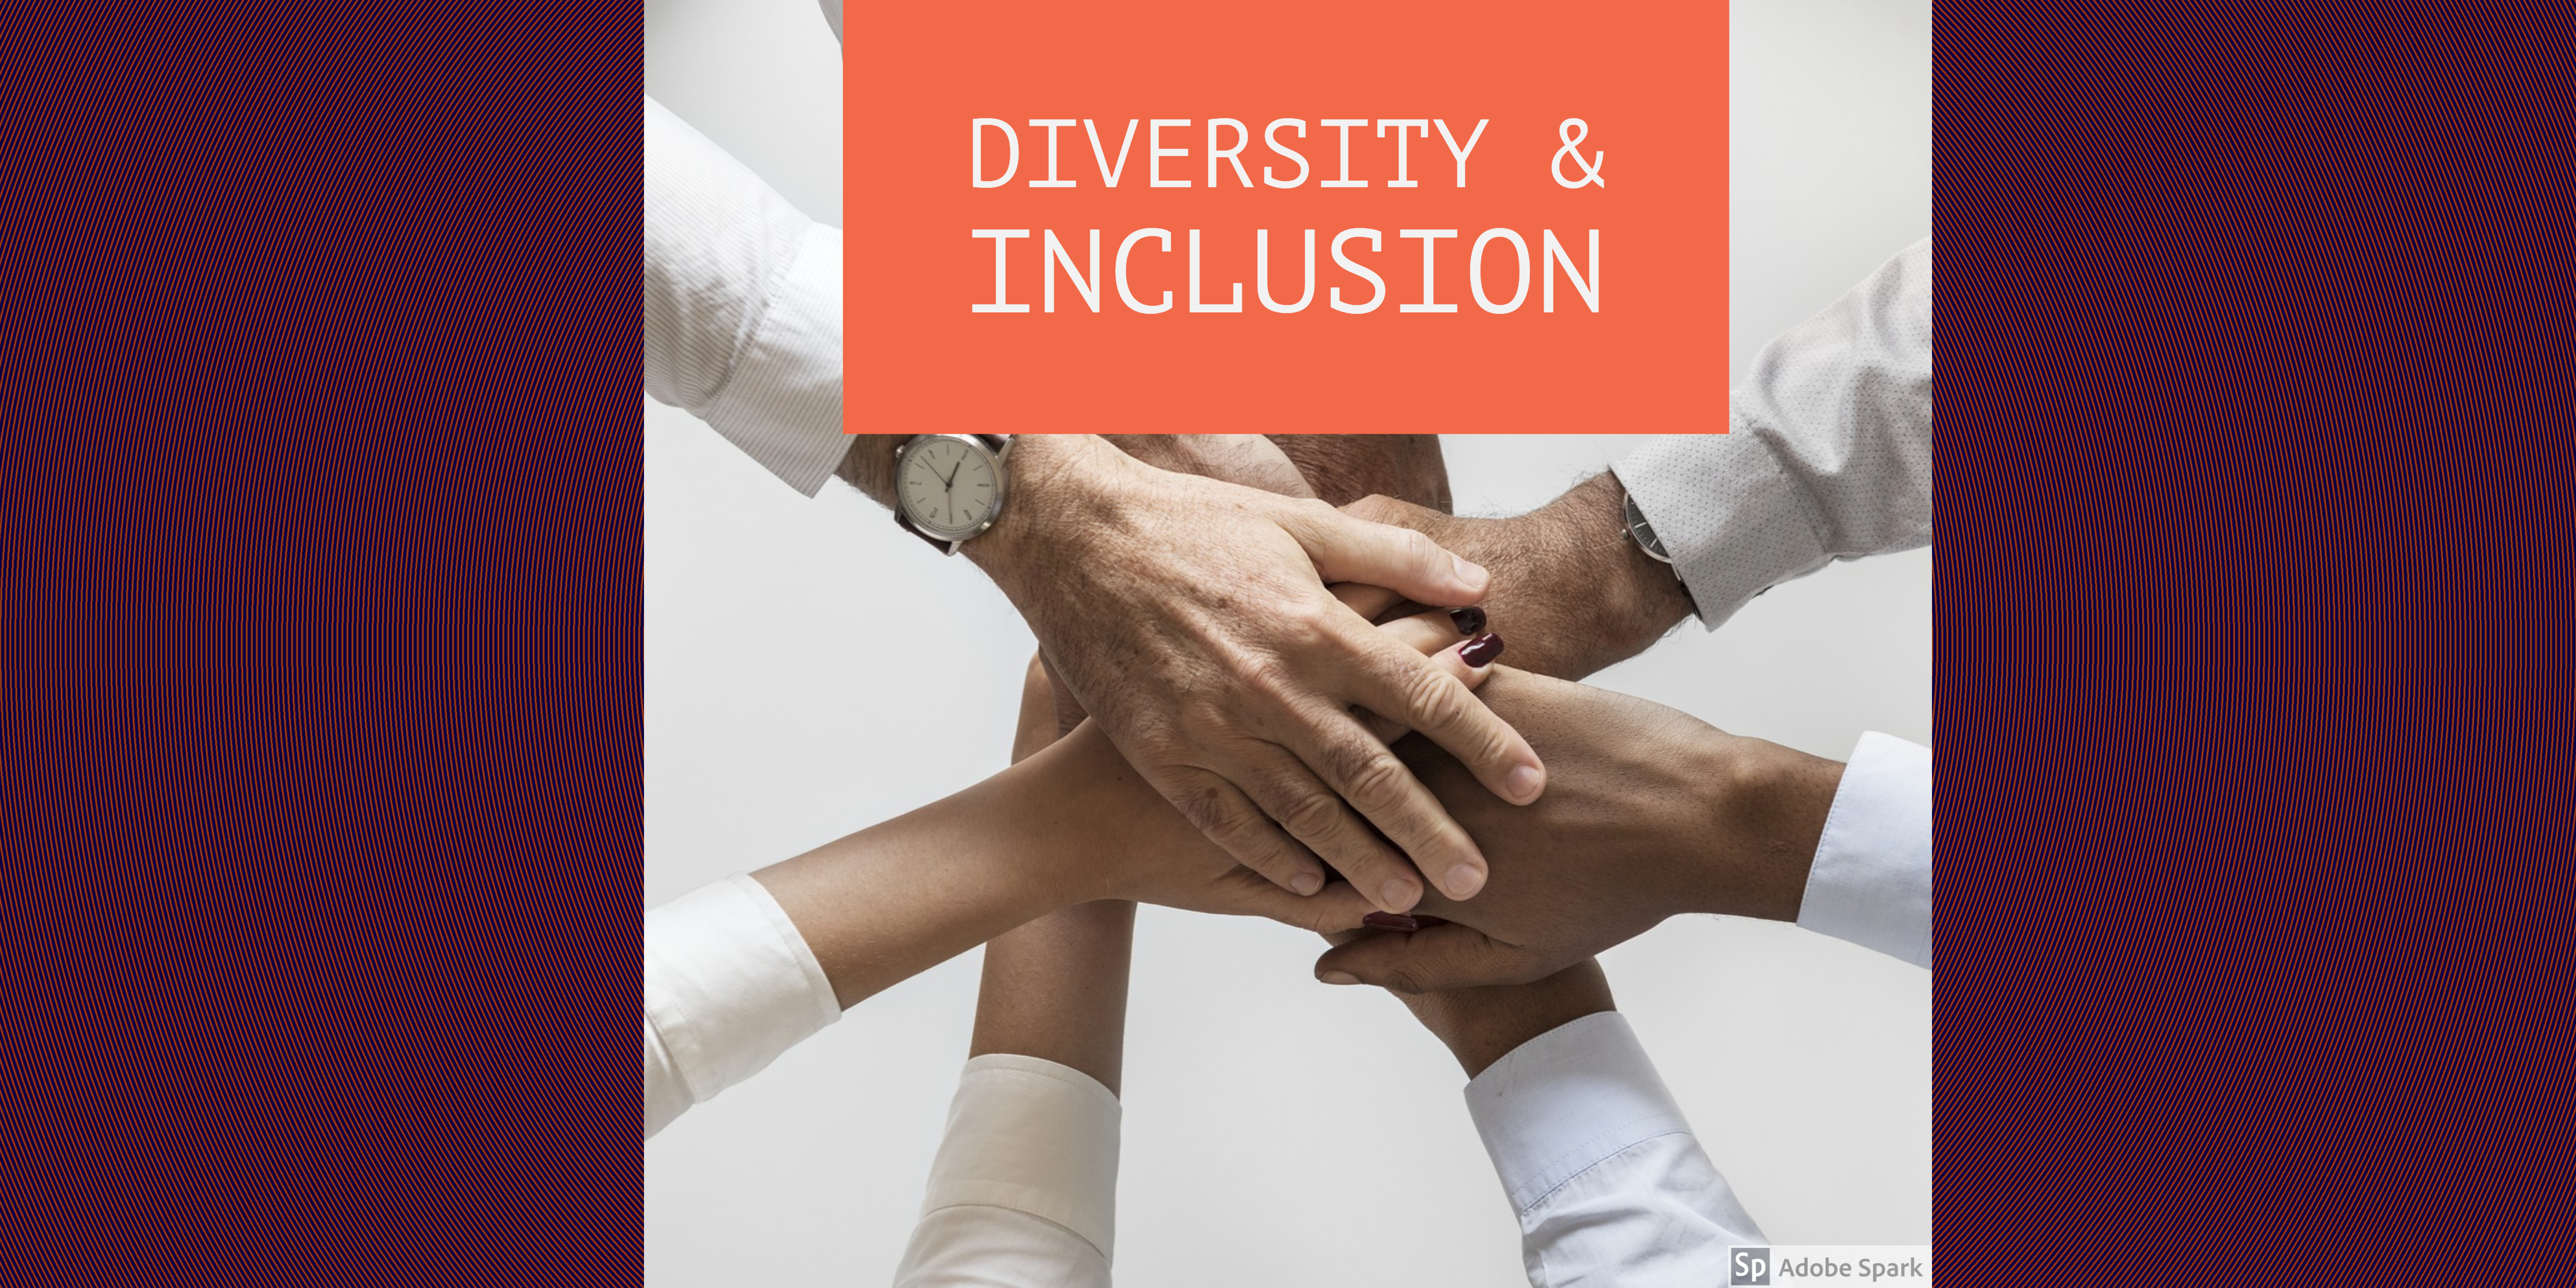 FLF ’18 Featured Session: Diversity & Inclusion